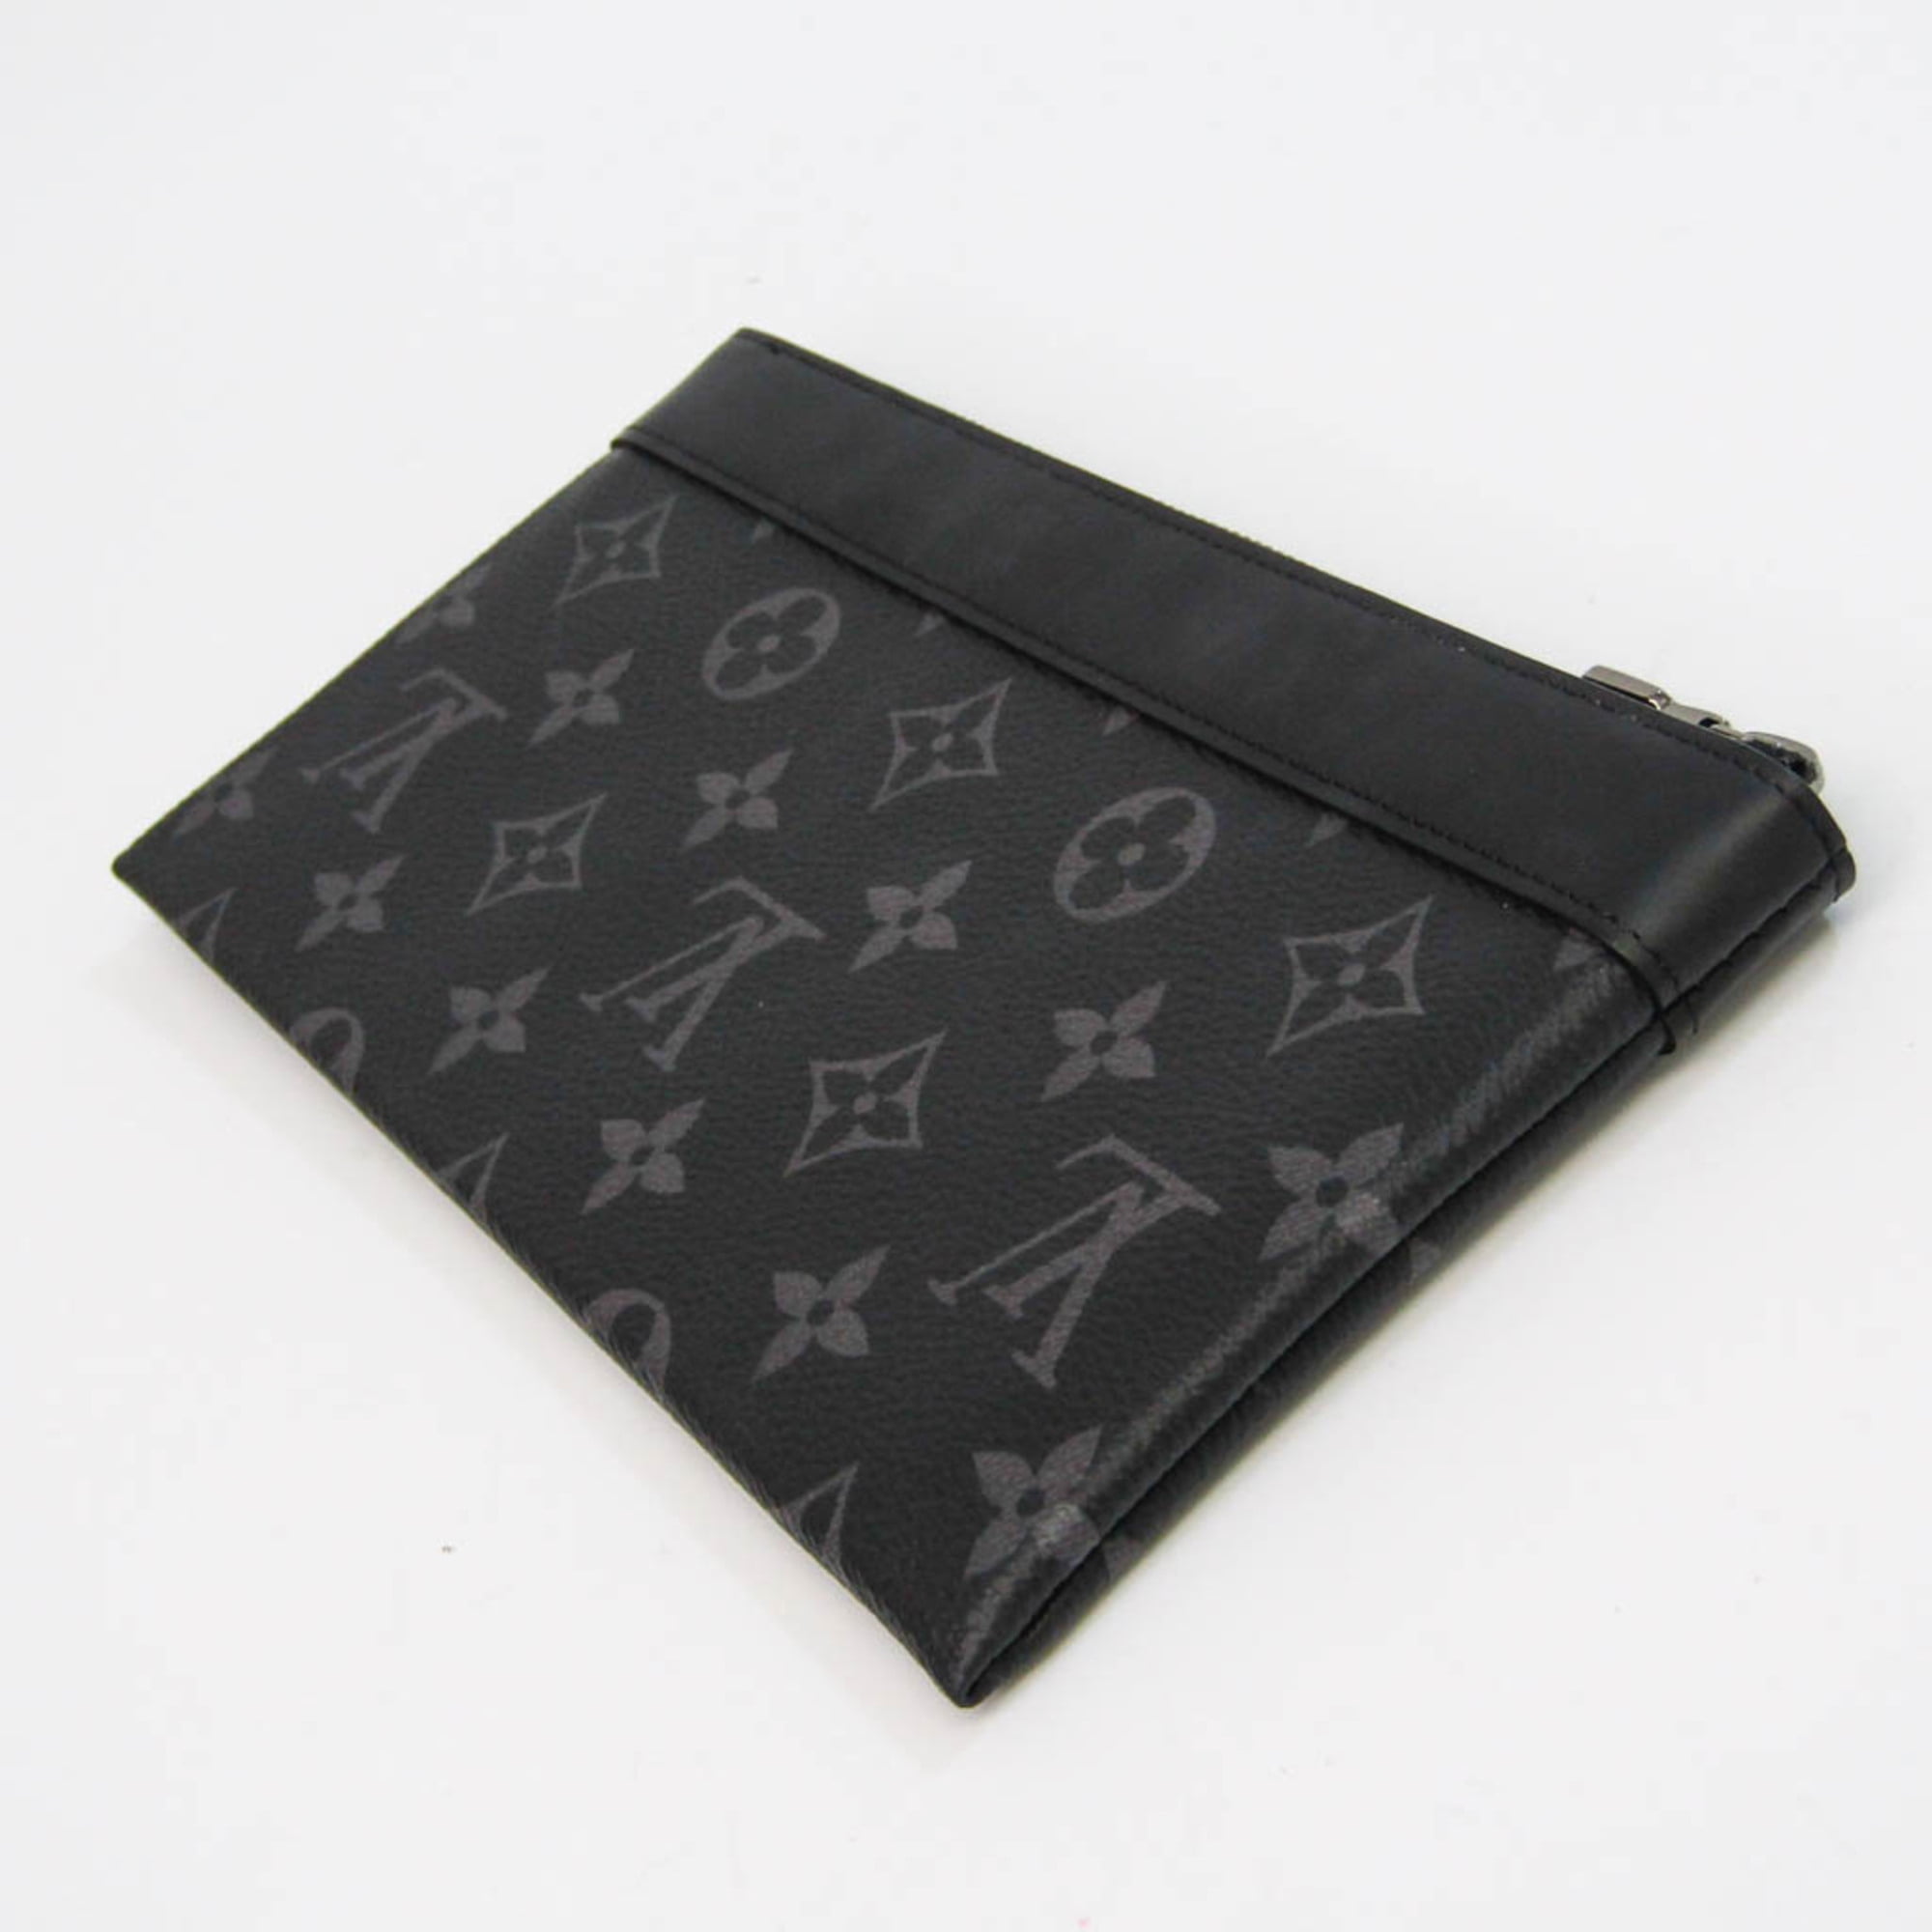 LOUIS VUITTON LV Pochette Discovery PM Used Clutch Monogram